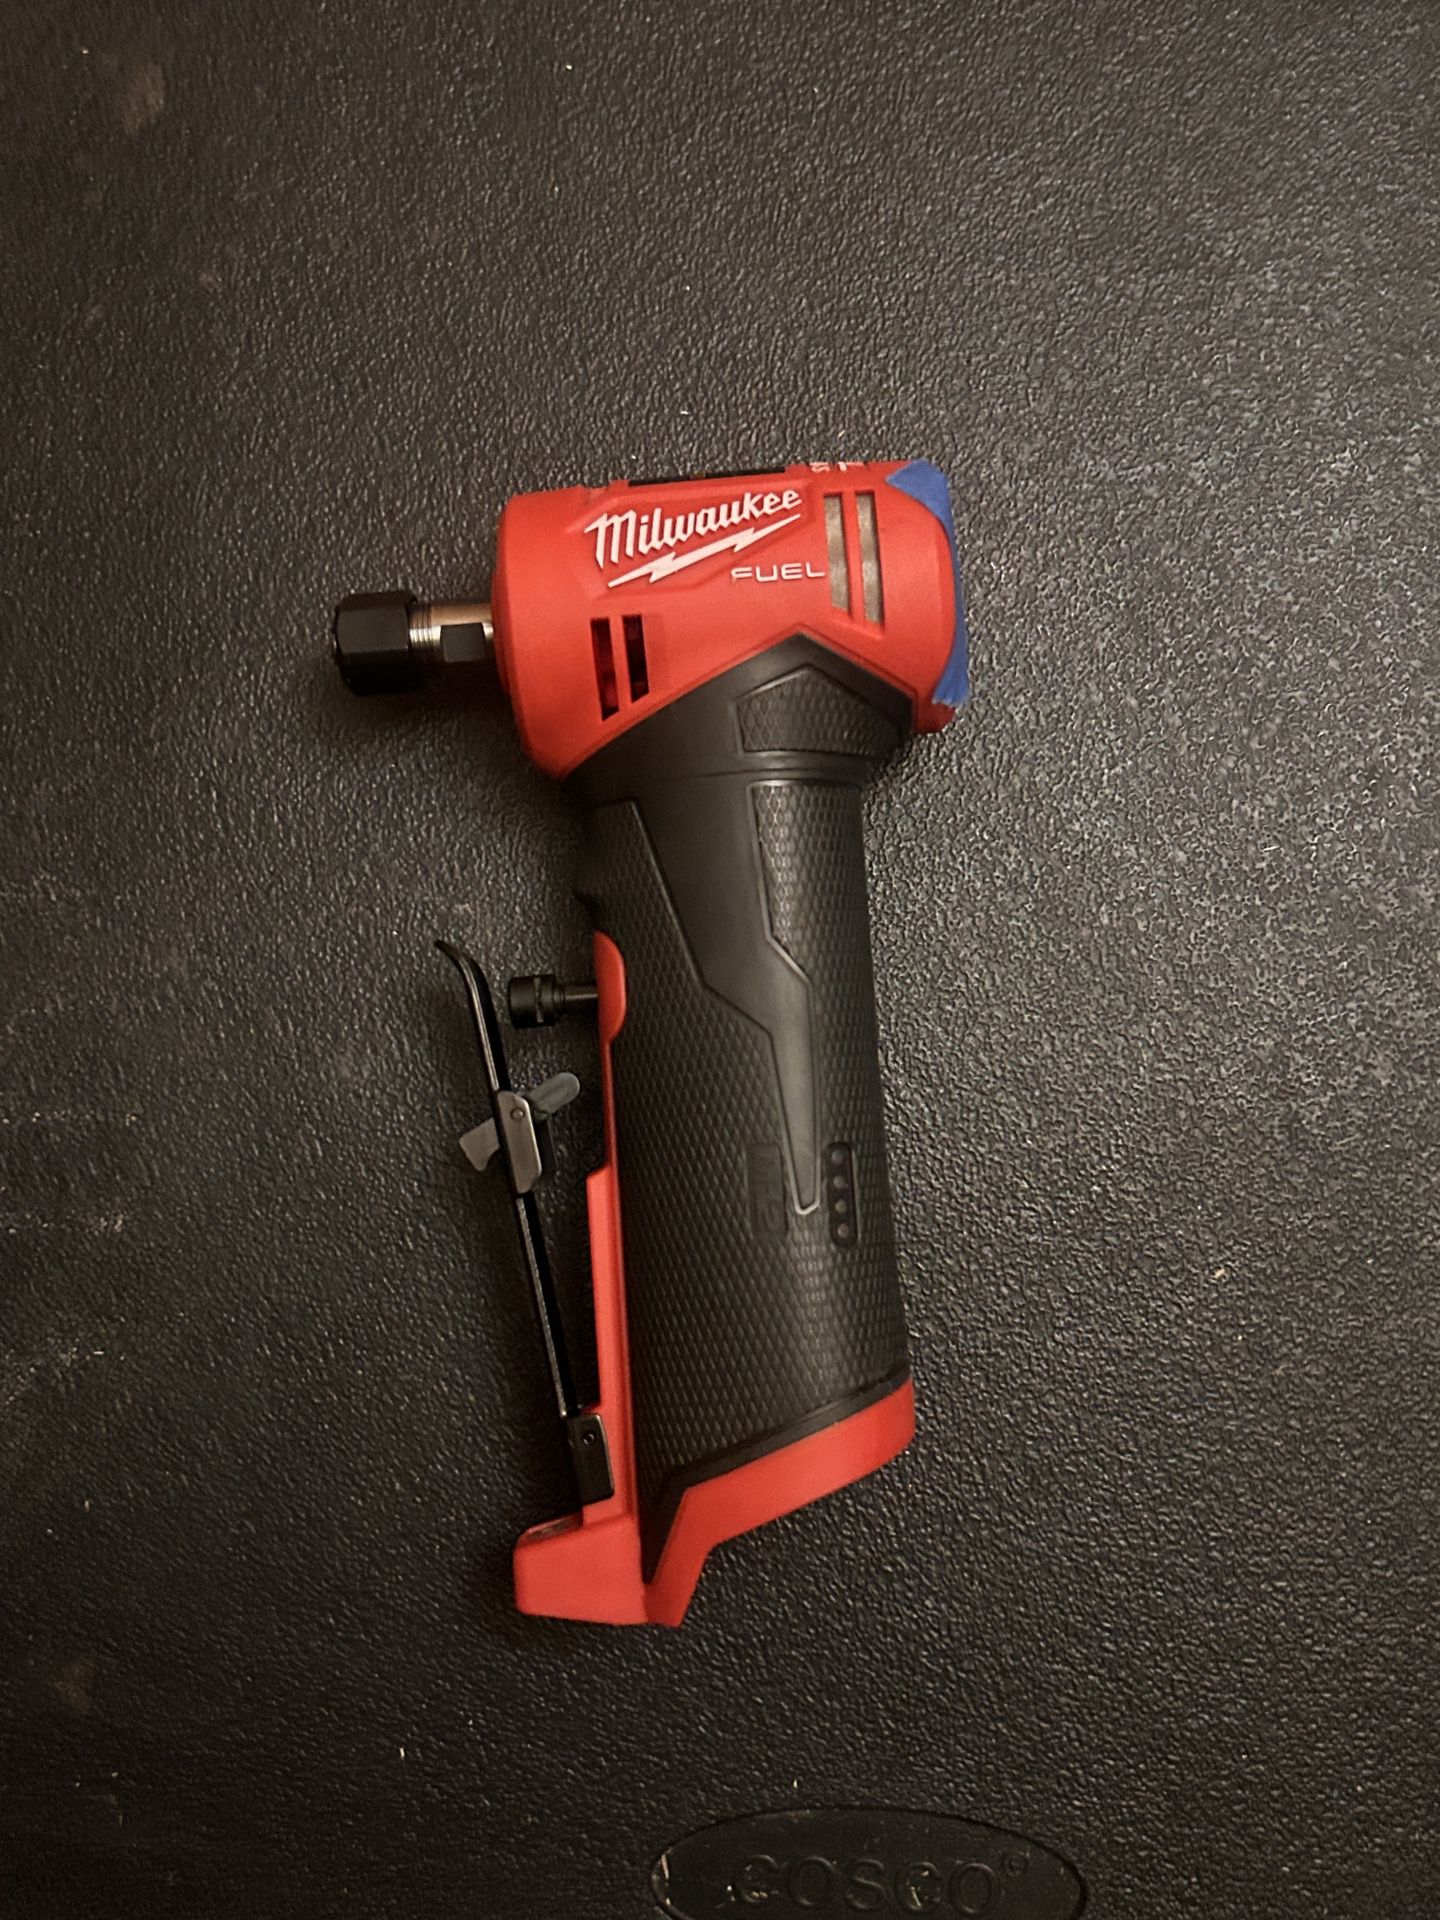 New-M12 FUEL 12V Lithium-lon Brushless Cordless 1/4 in. Right Angle Die Grinder (Tool-Only)